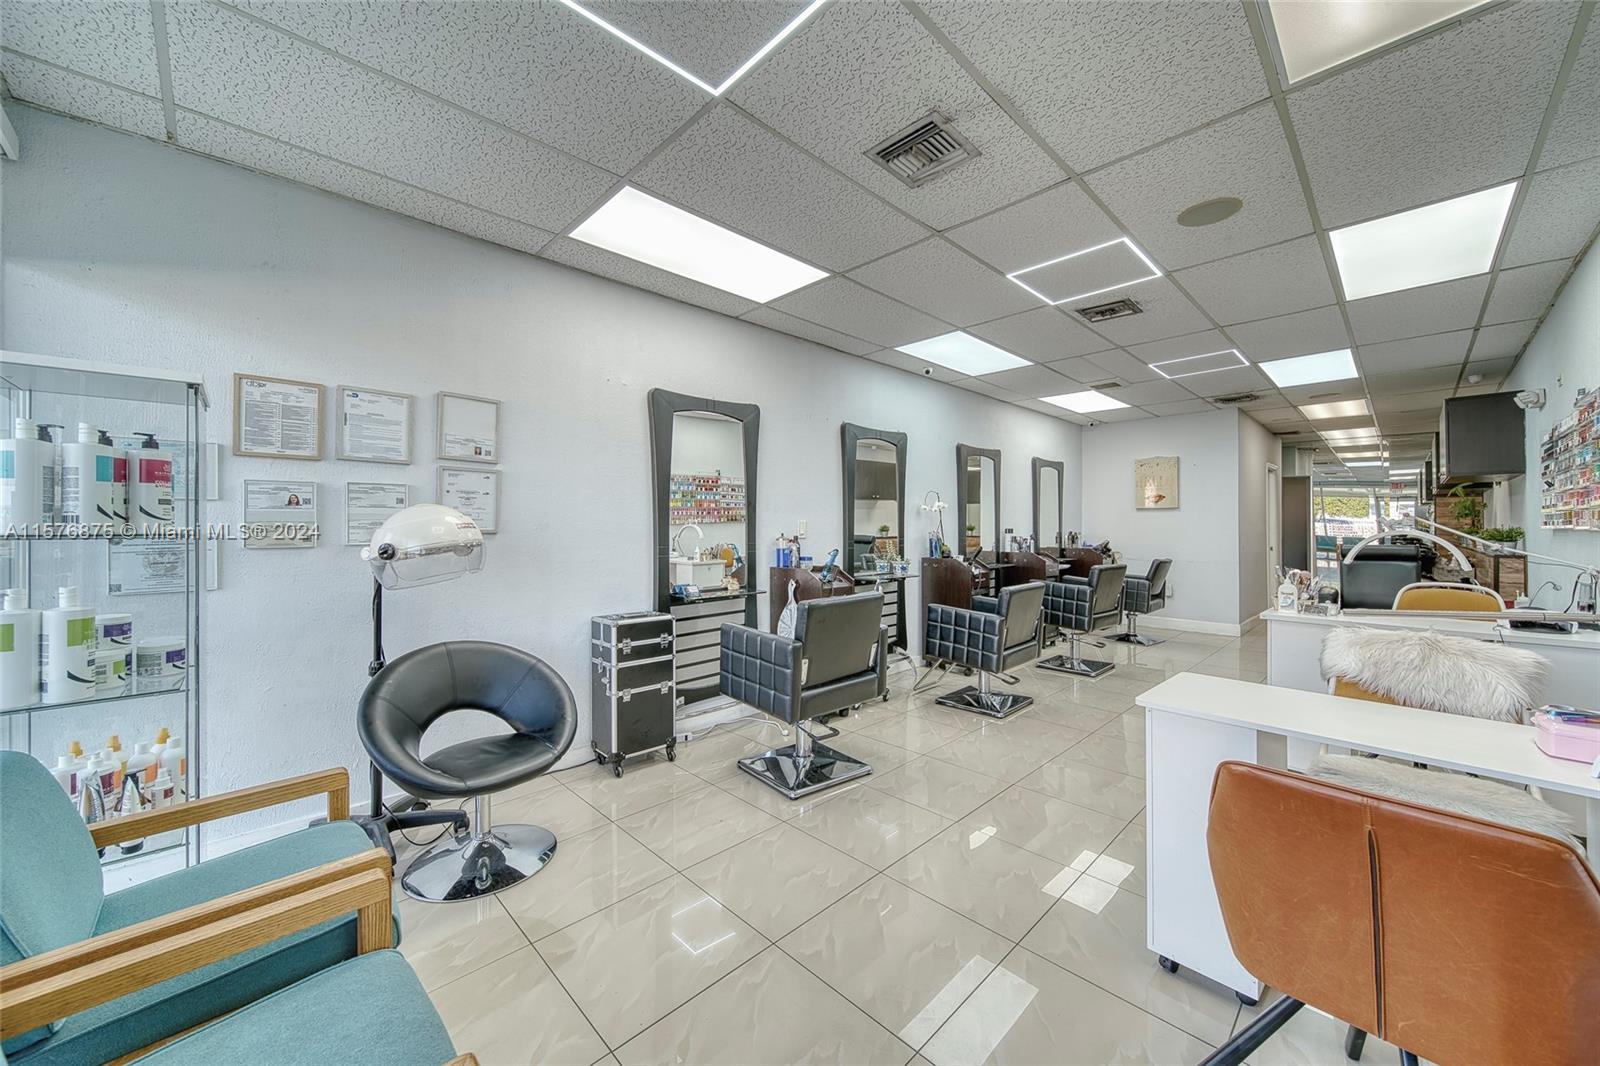 Photo of Beauty Salon/Barbershop For Sale On 107 And Bird Rd in Miami, FL